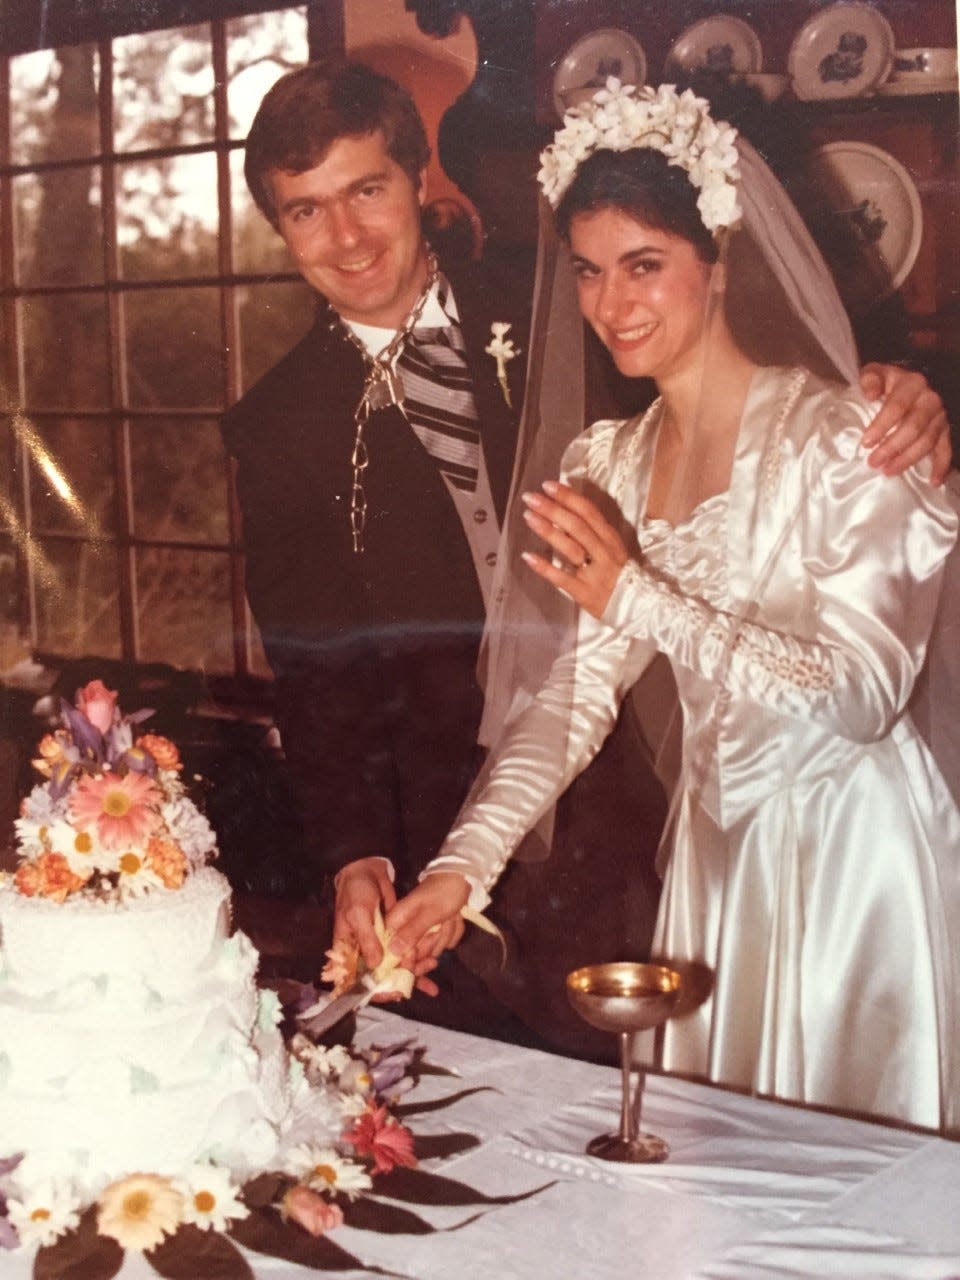 Michael and Mary Easley cut the cake on their wedding day.